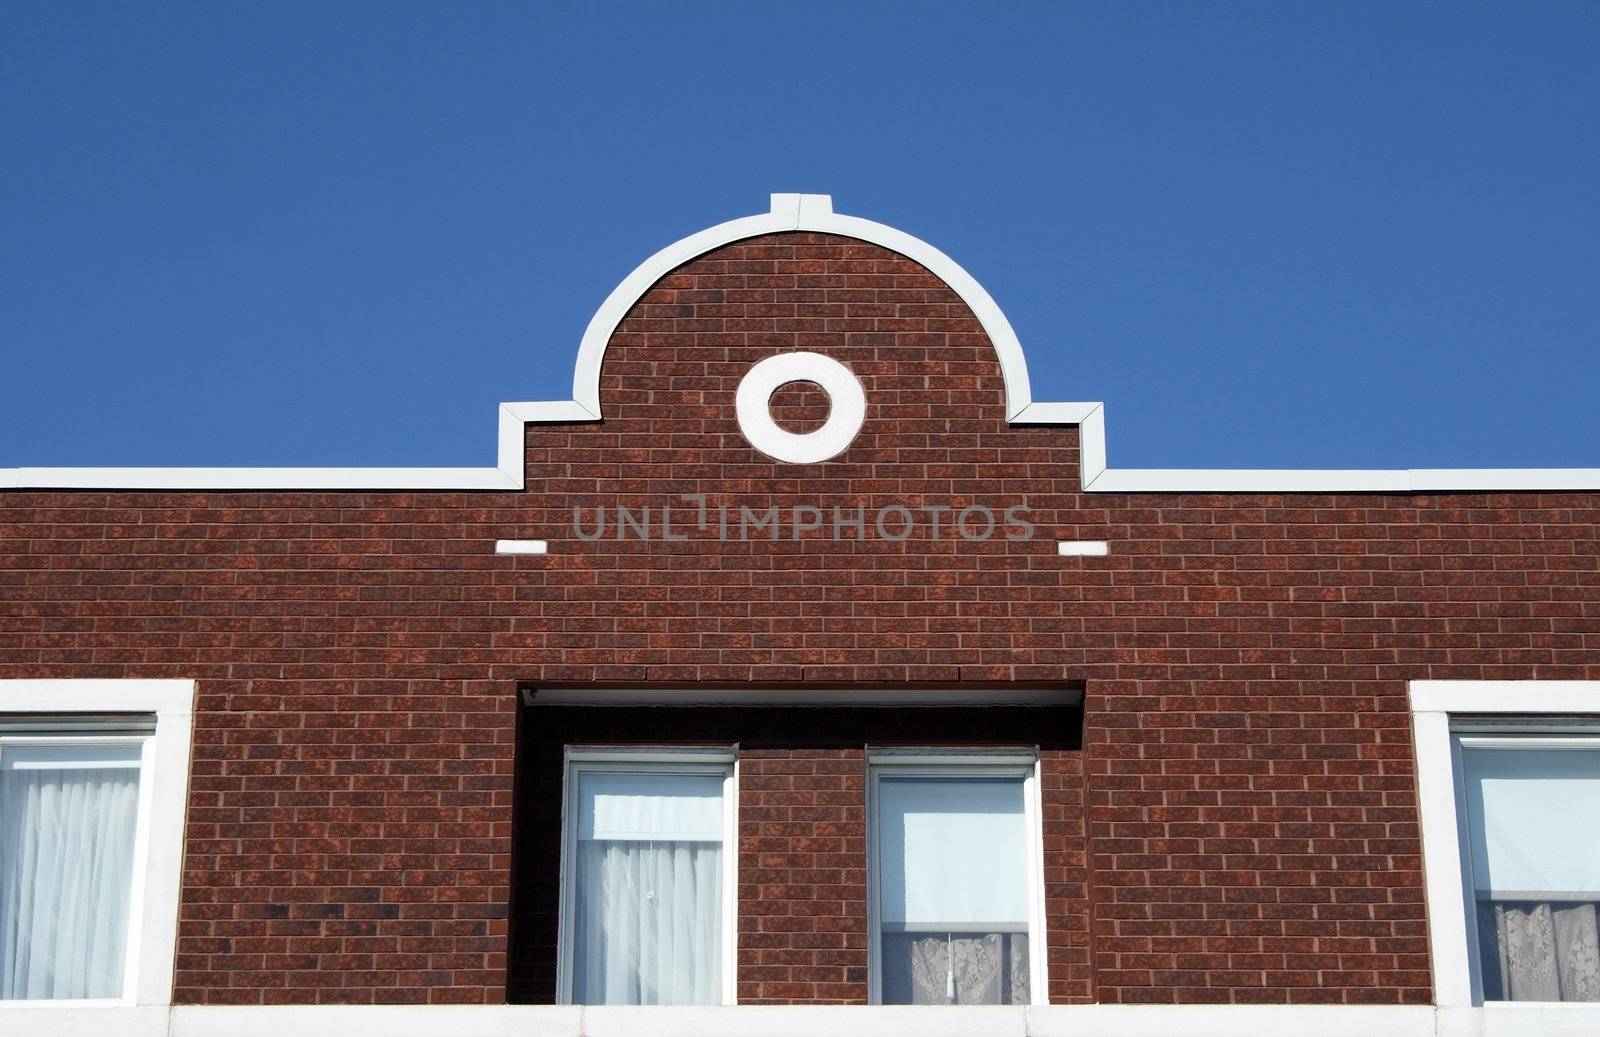 Facade and ornamental rooftop of a red brick house.